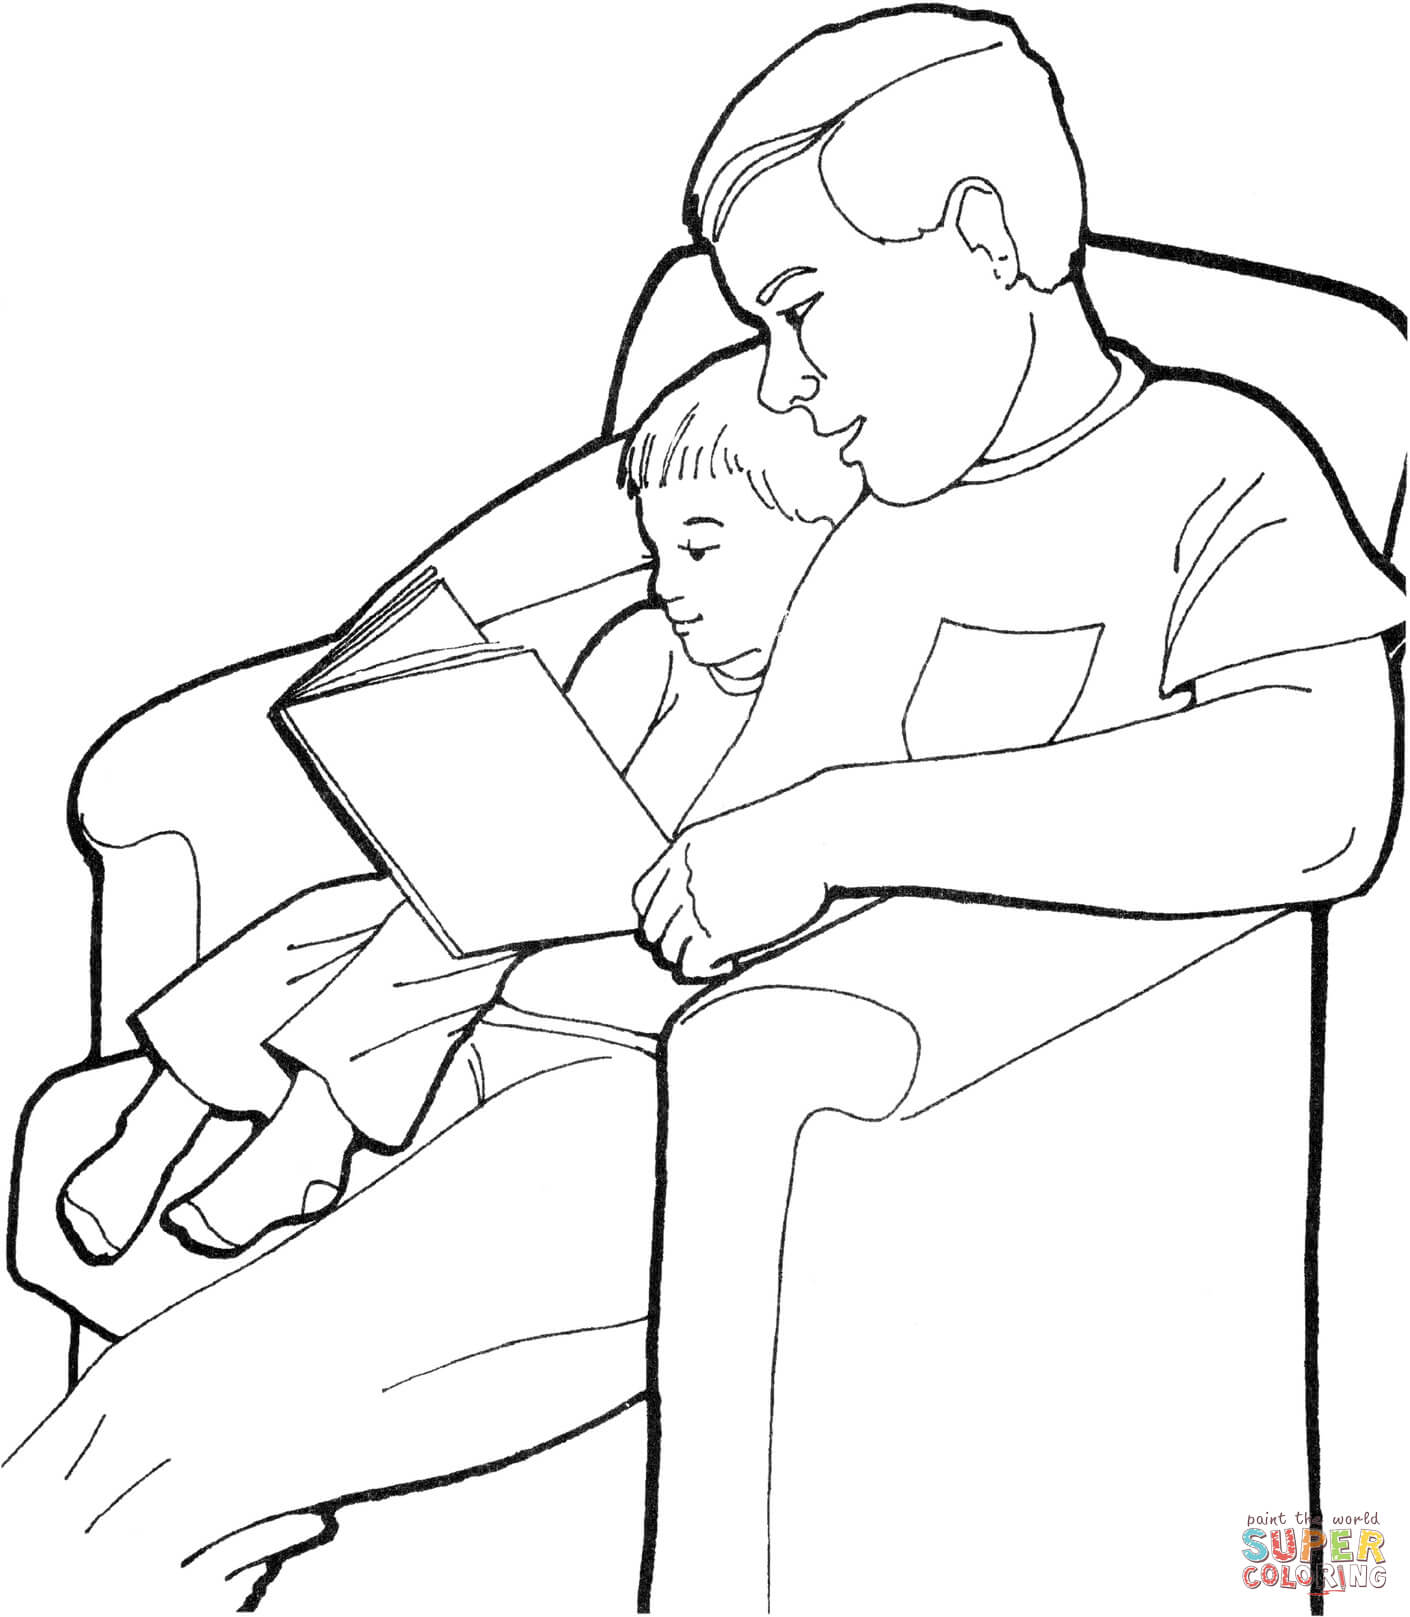 Dad And Son Coloring Page - Coloring Home